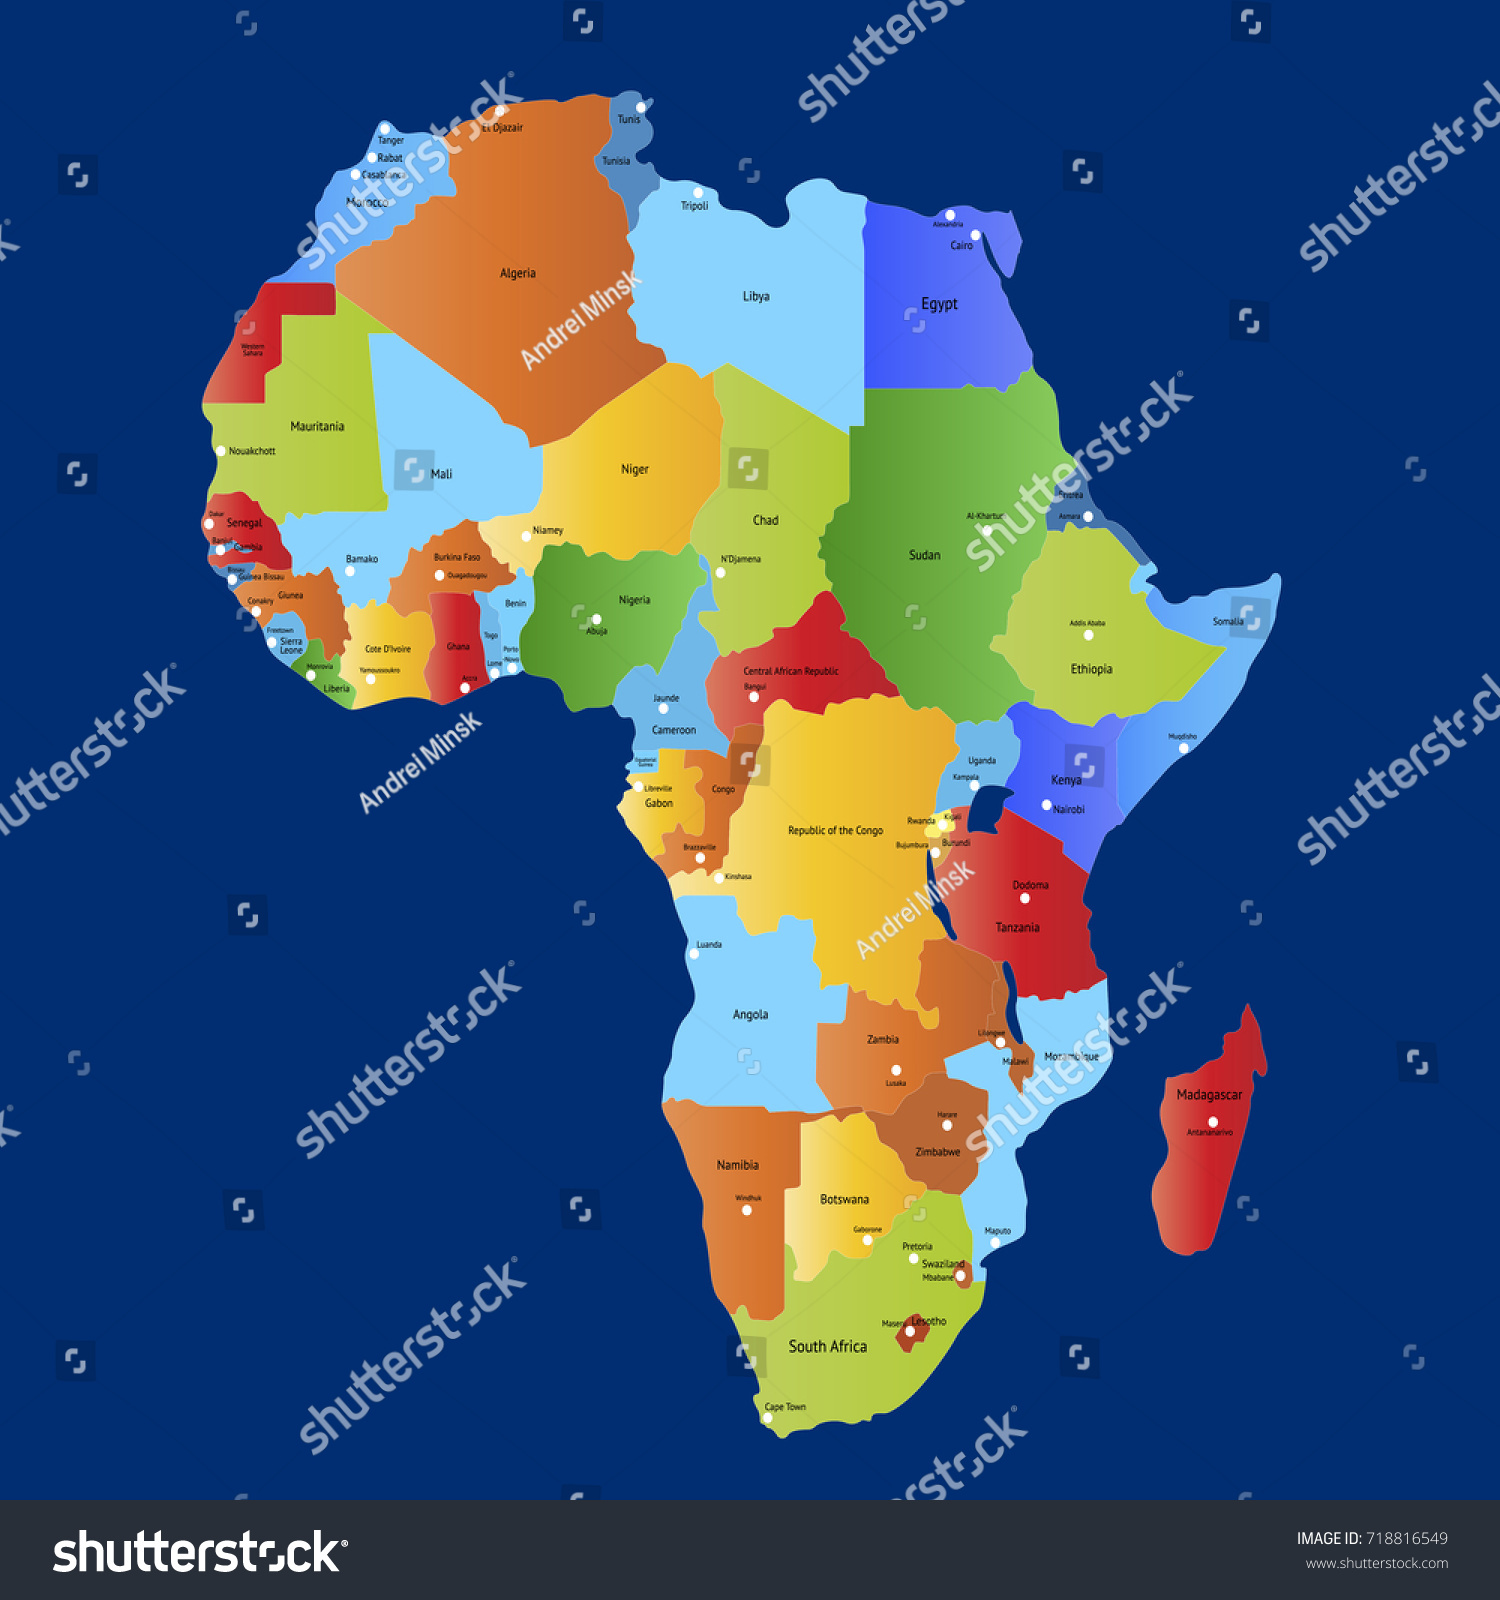 Map Of Africa Royalty Free Stock Vector 718816549 8866